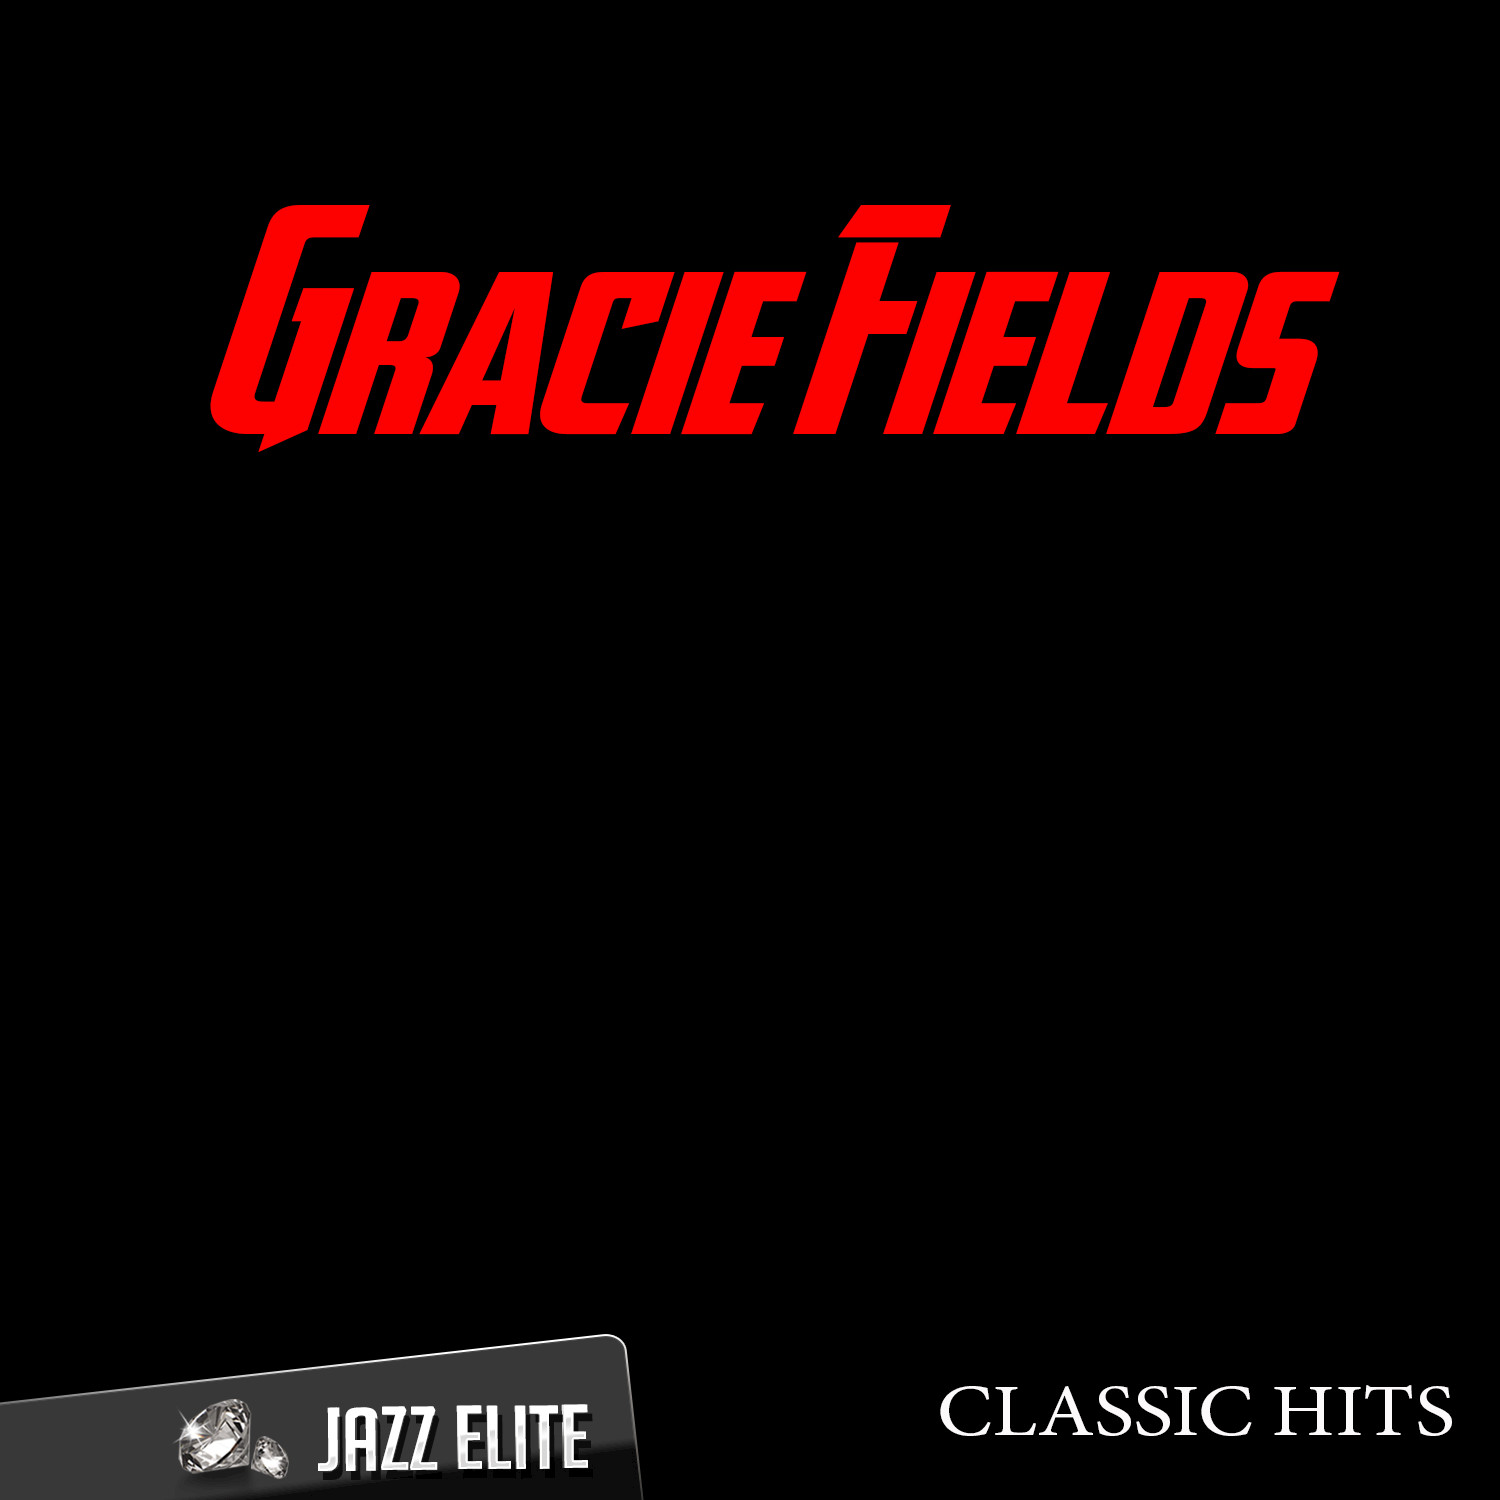 Classic Hits By Gracie Fields